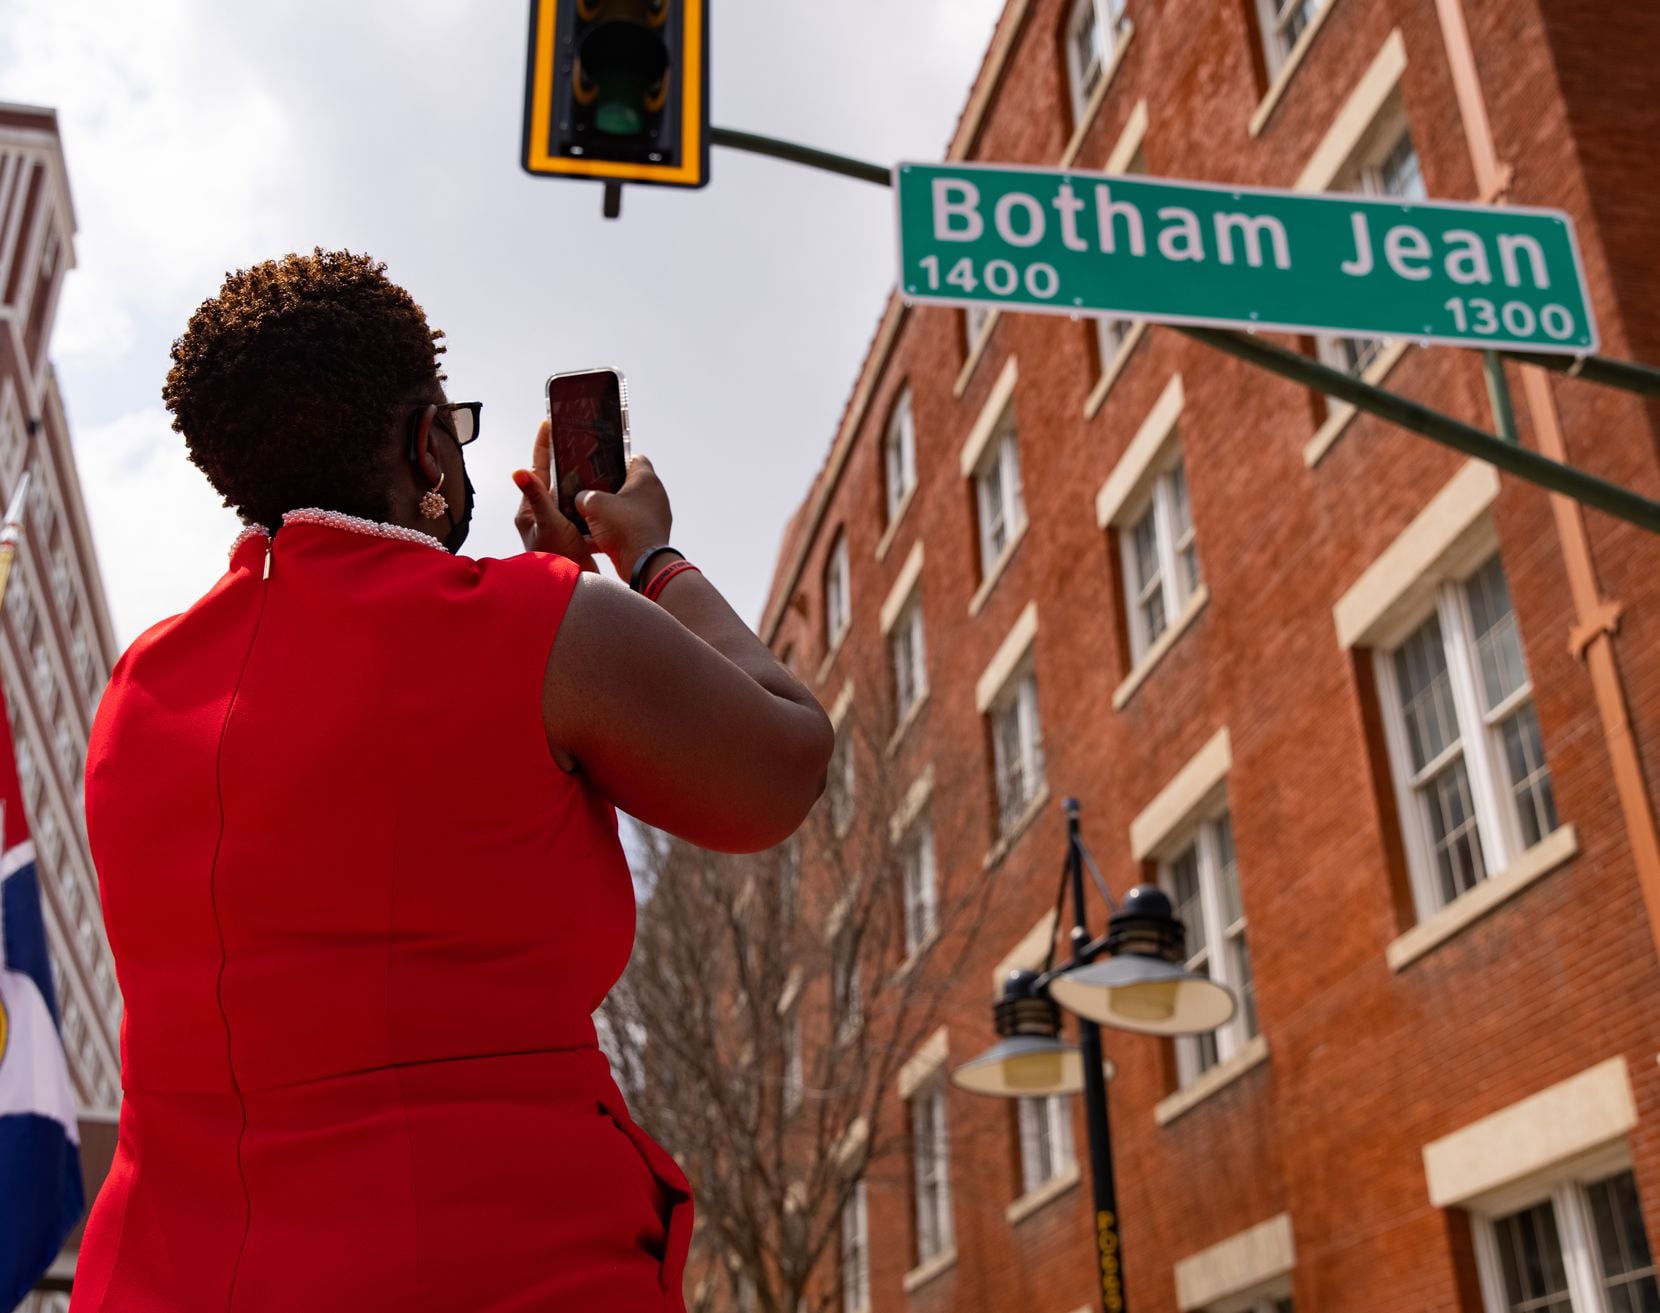 Botham Jean's mother, Allison Jean, takes a photo of a sign bearing his name at a ceremony to redub a four-mile stretch of Lamar Street in his honor Saturday, March 27, 2021.